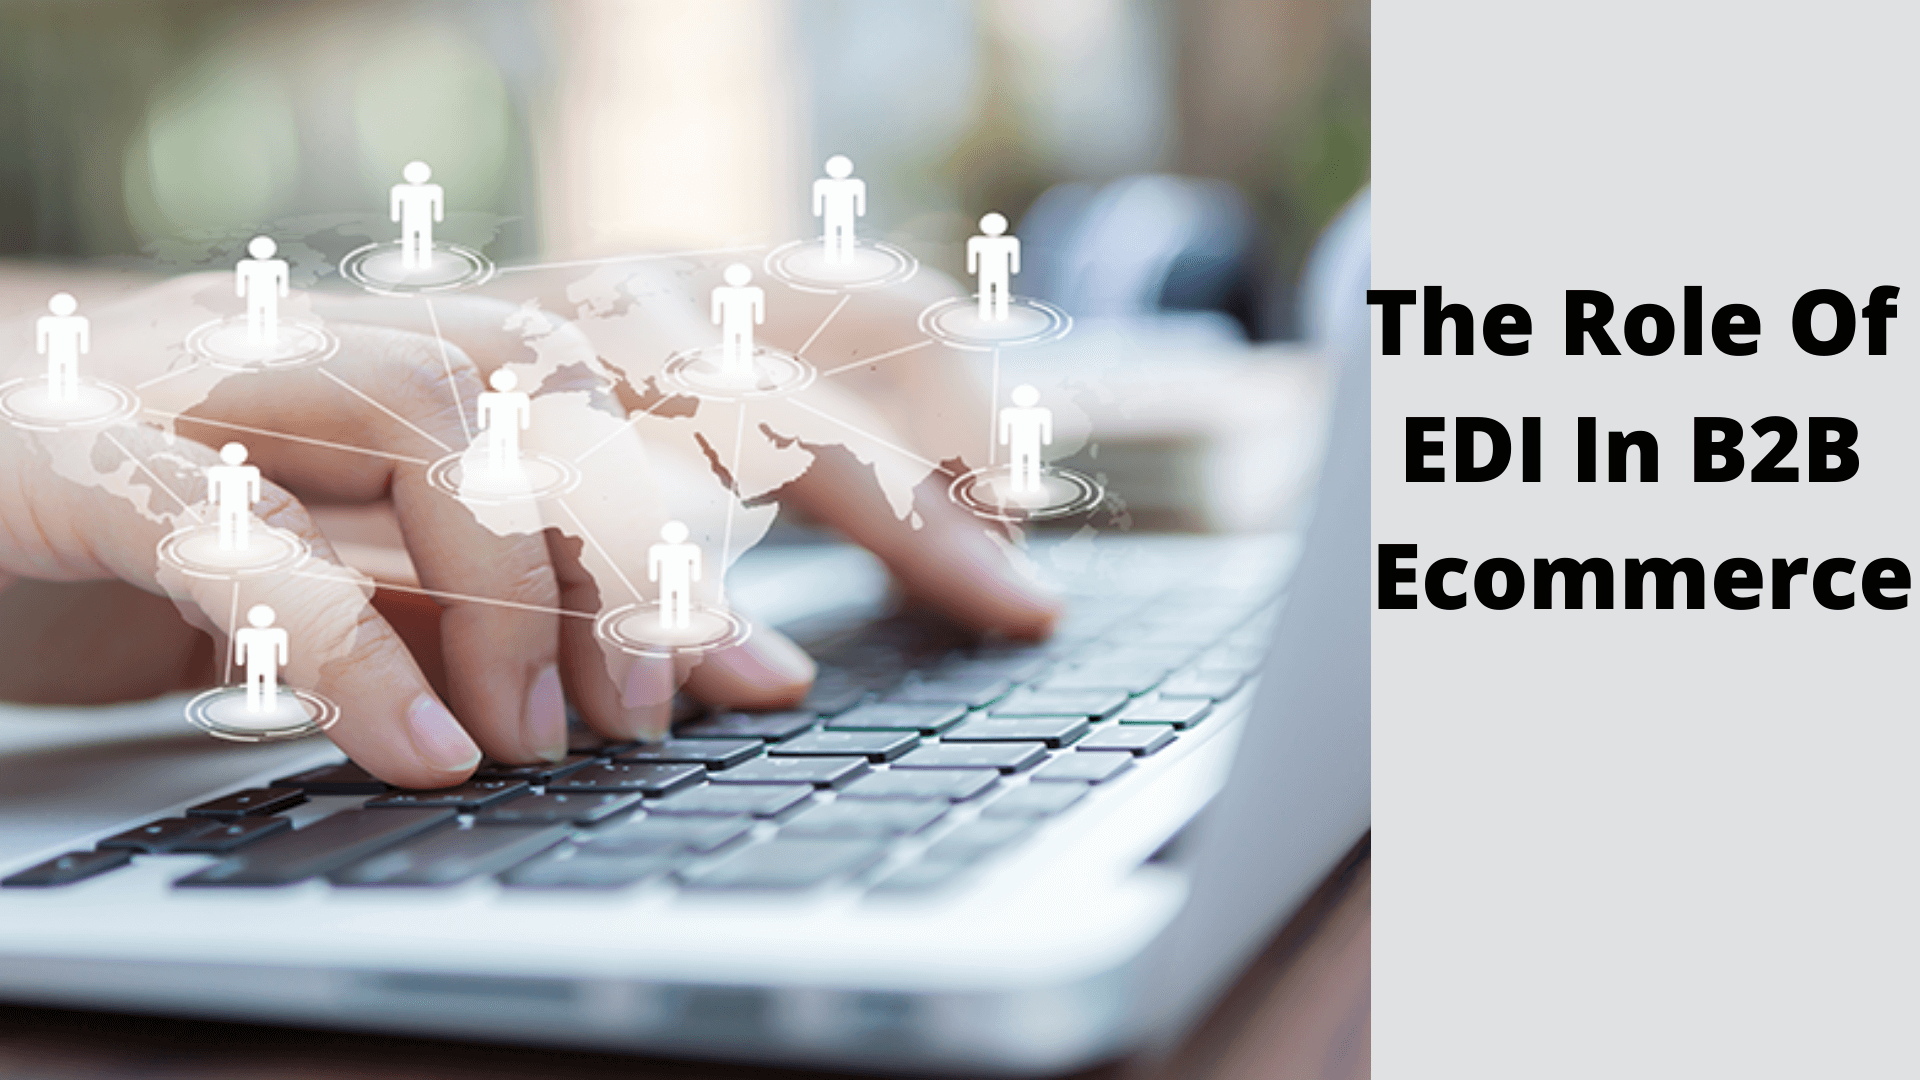 The Role Of EDI In B2B Ecommerce (2) (1)